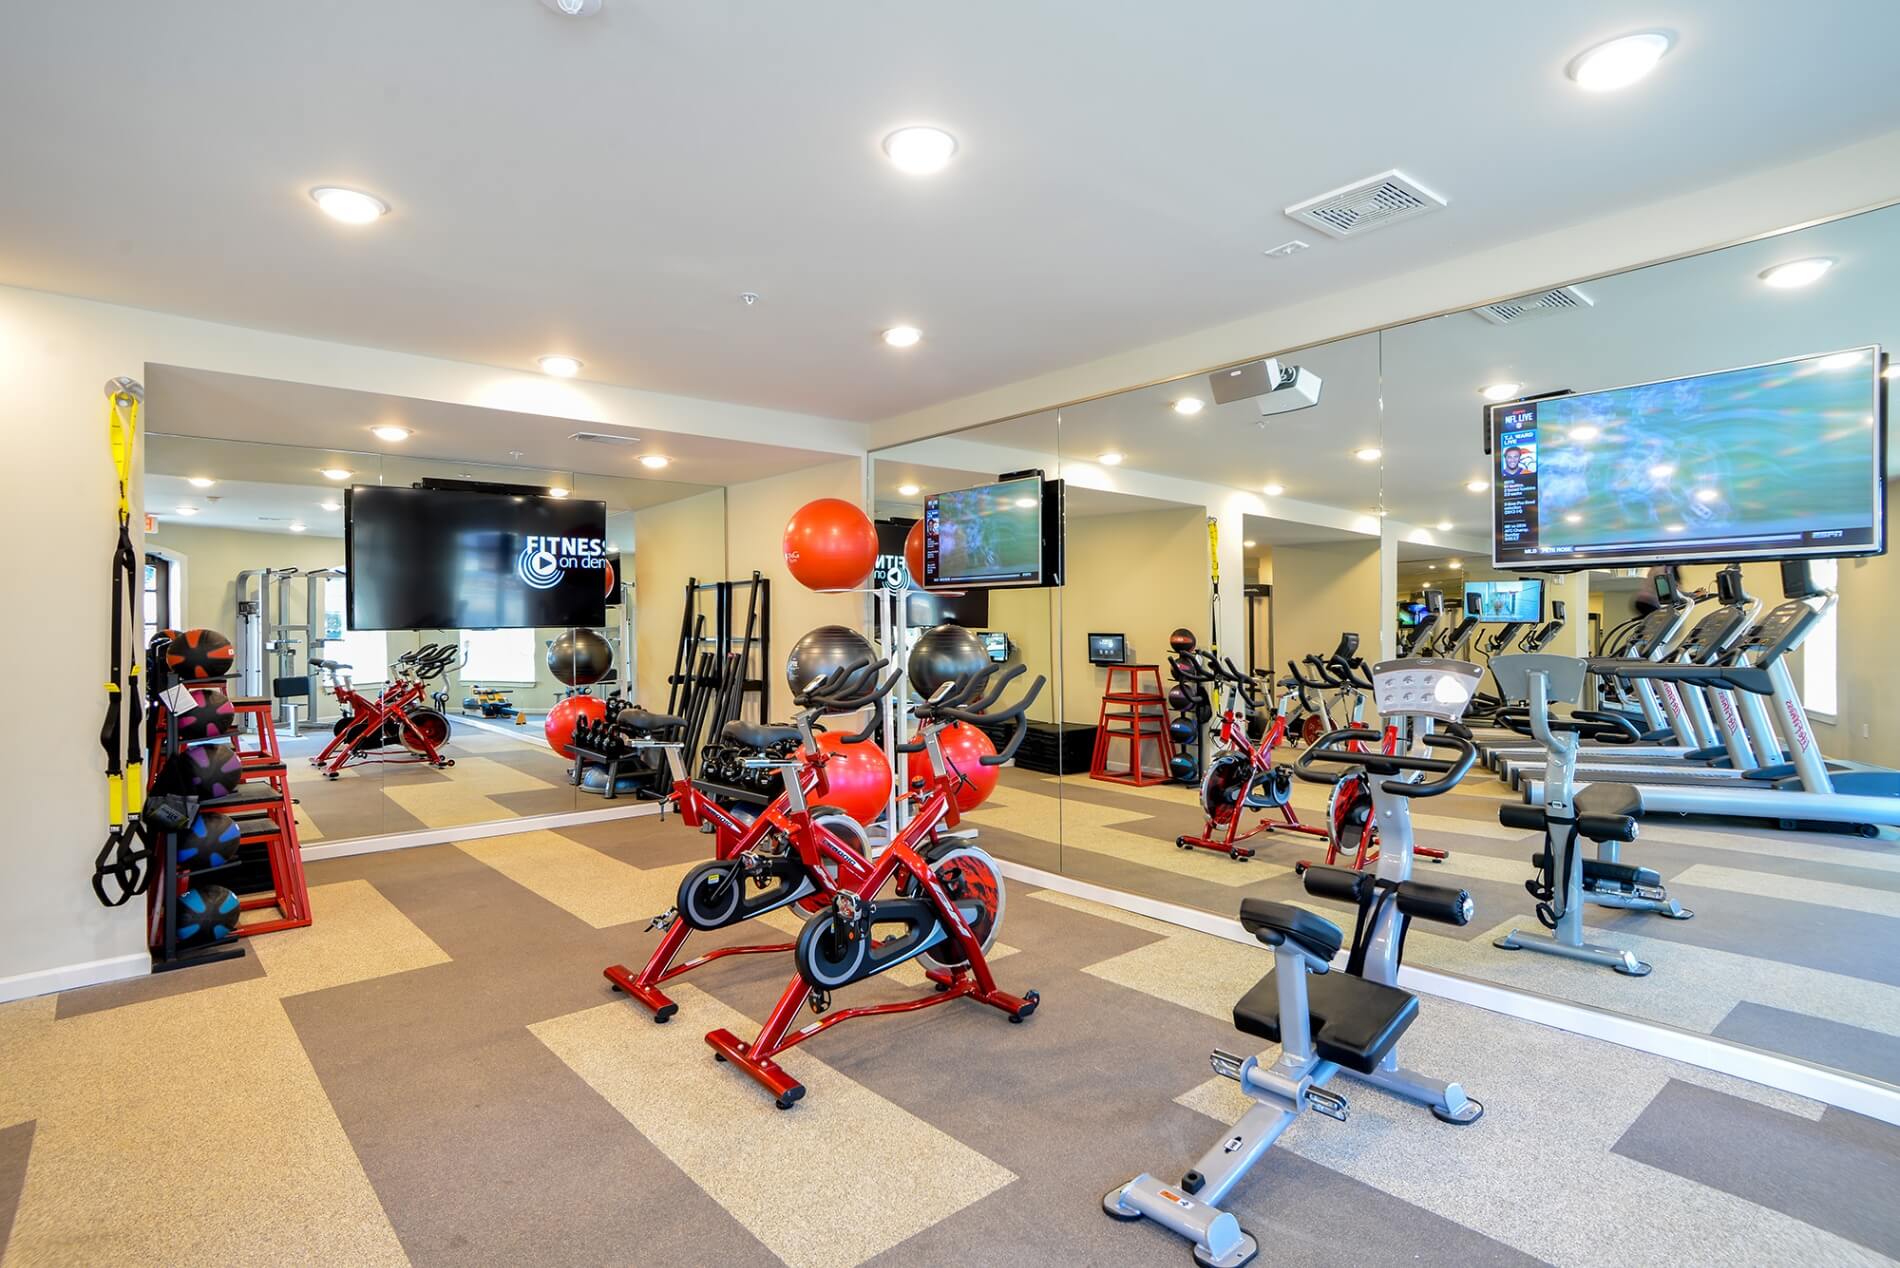 Fitness center with cardio and strength training equipment with mounted tvs